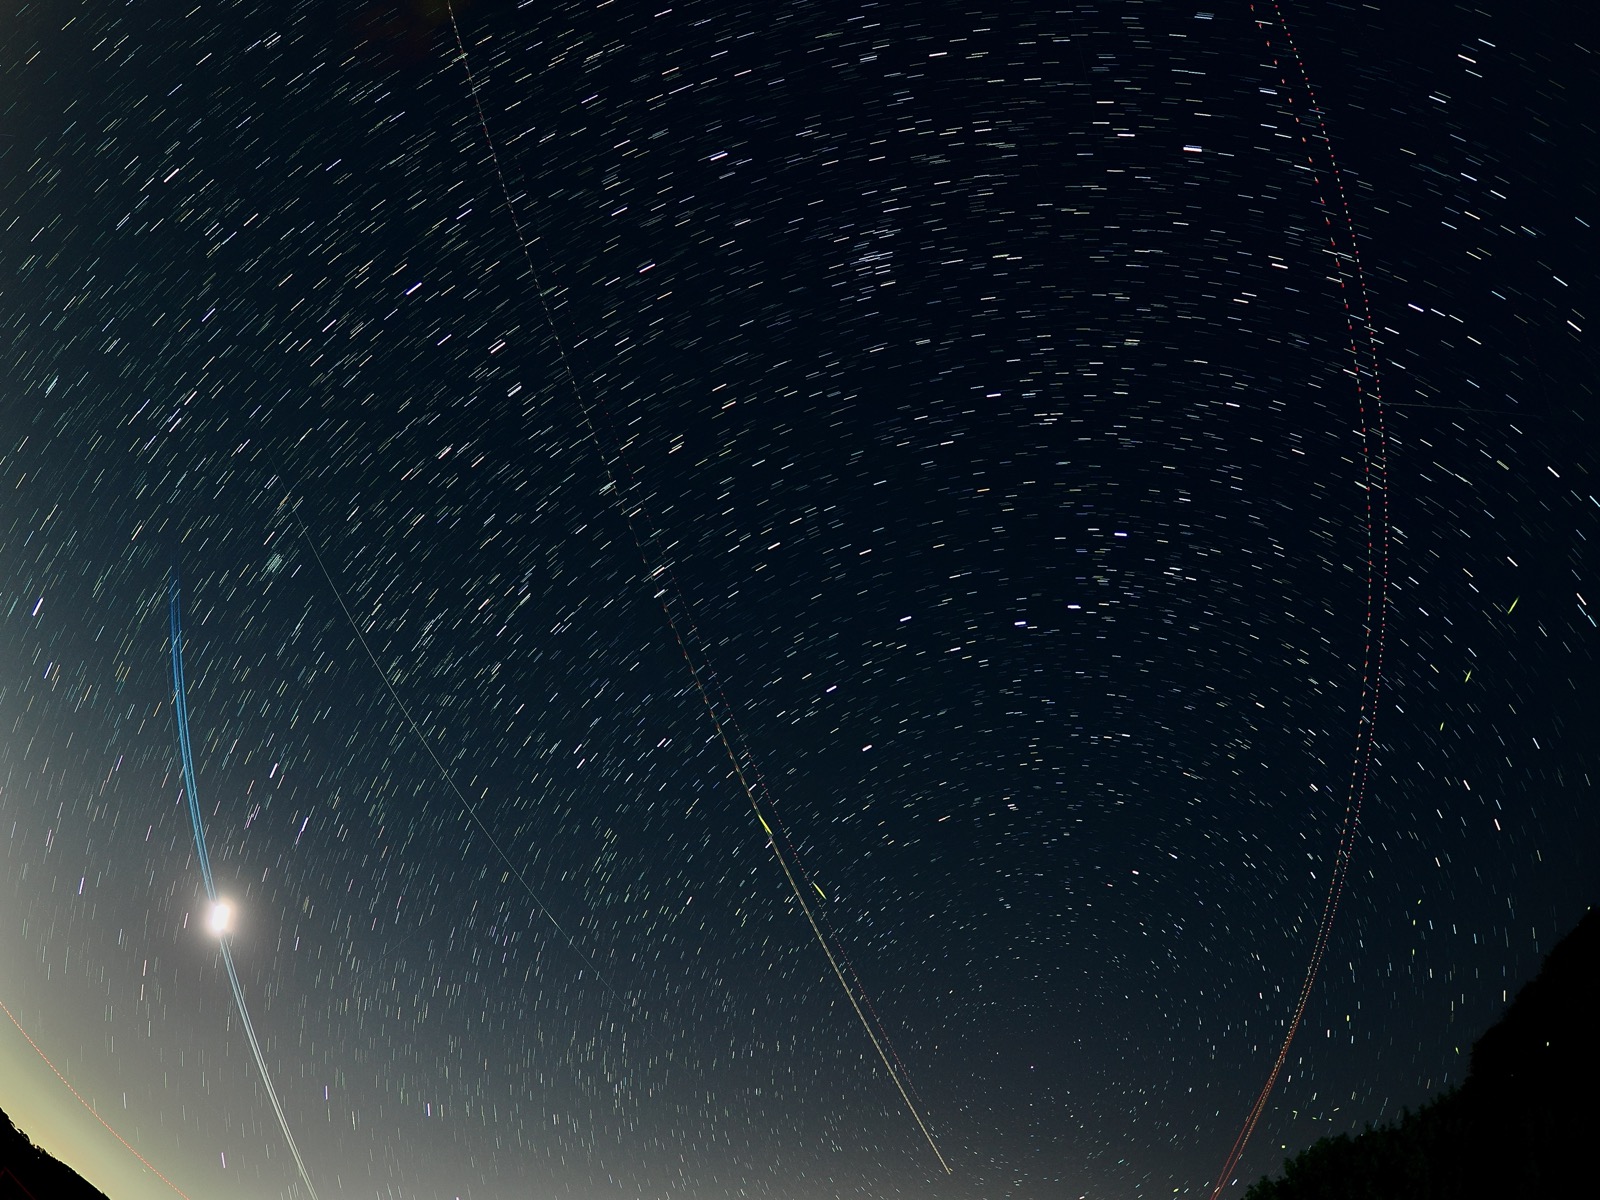 Light trail of a series of Starlink satellites passing before a crescent moon